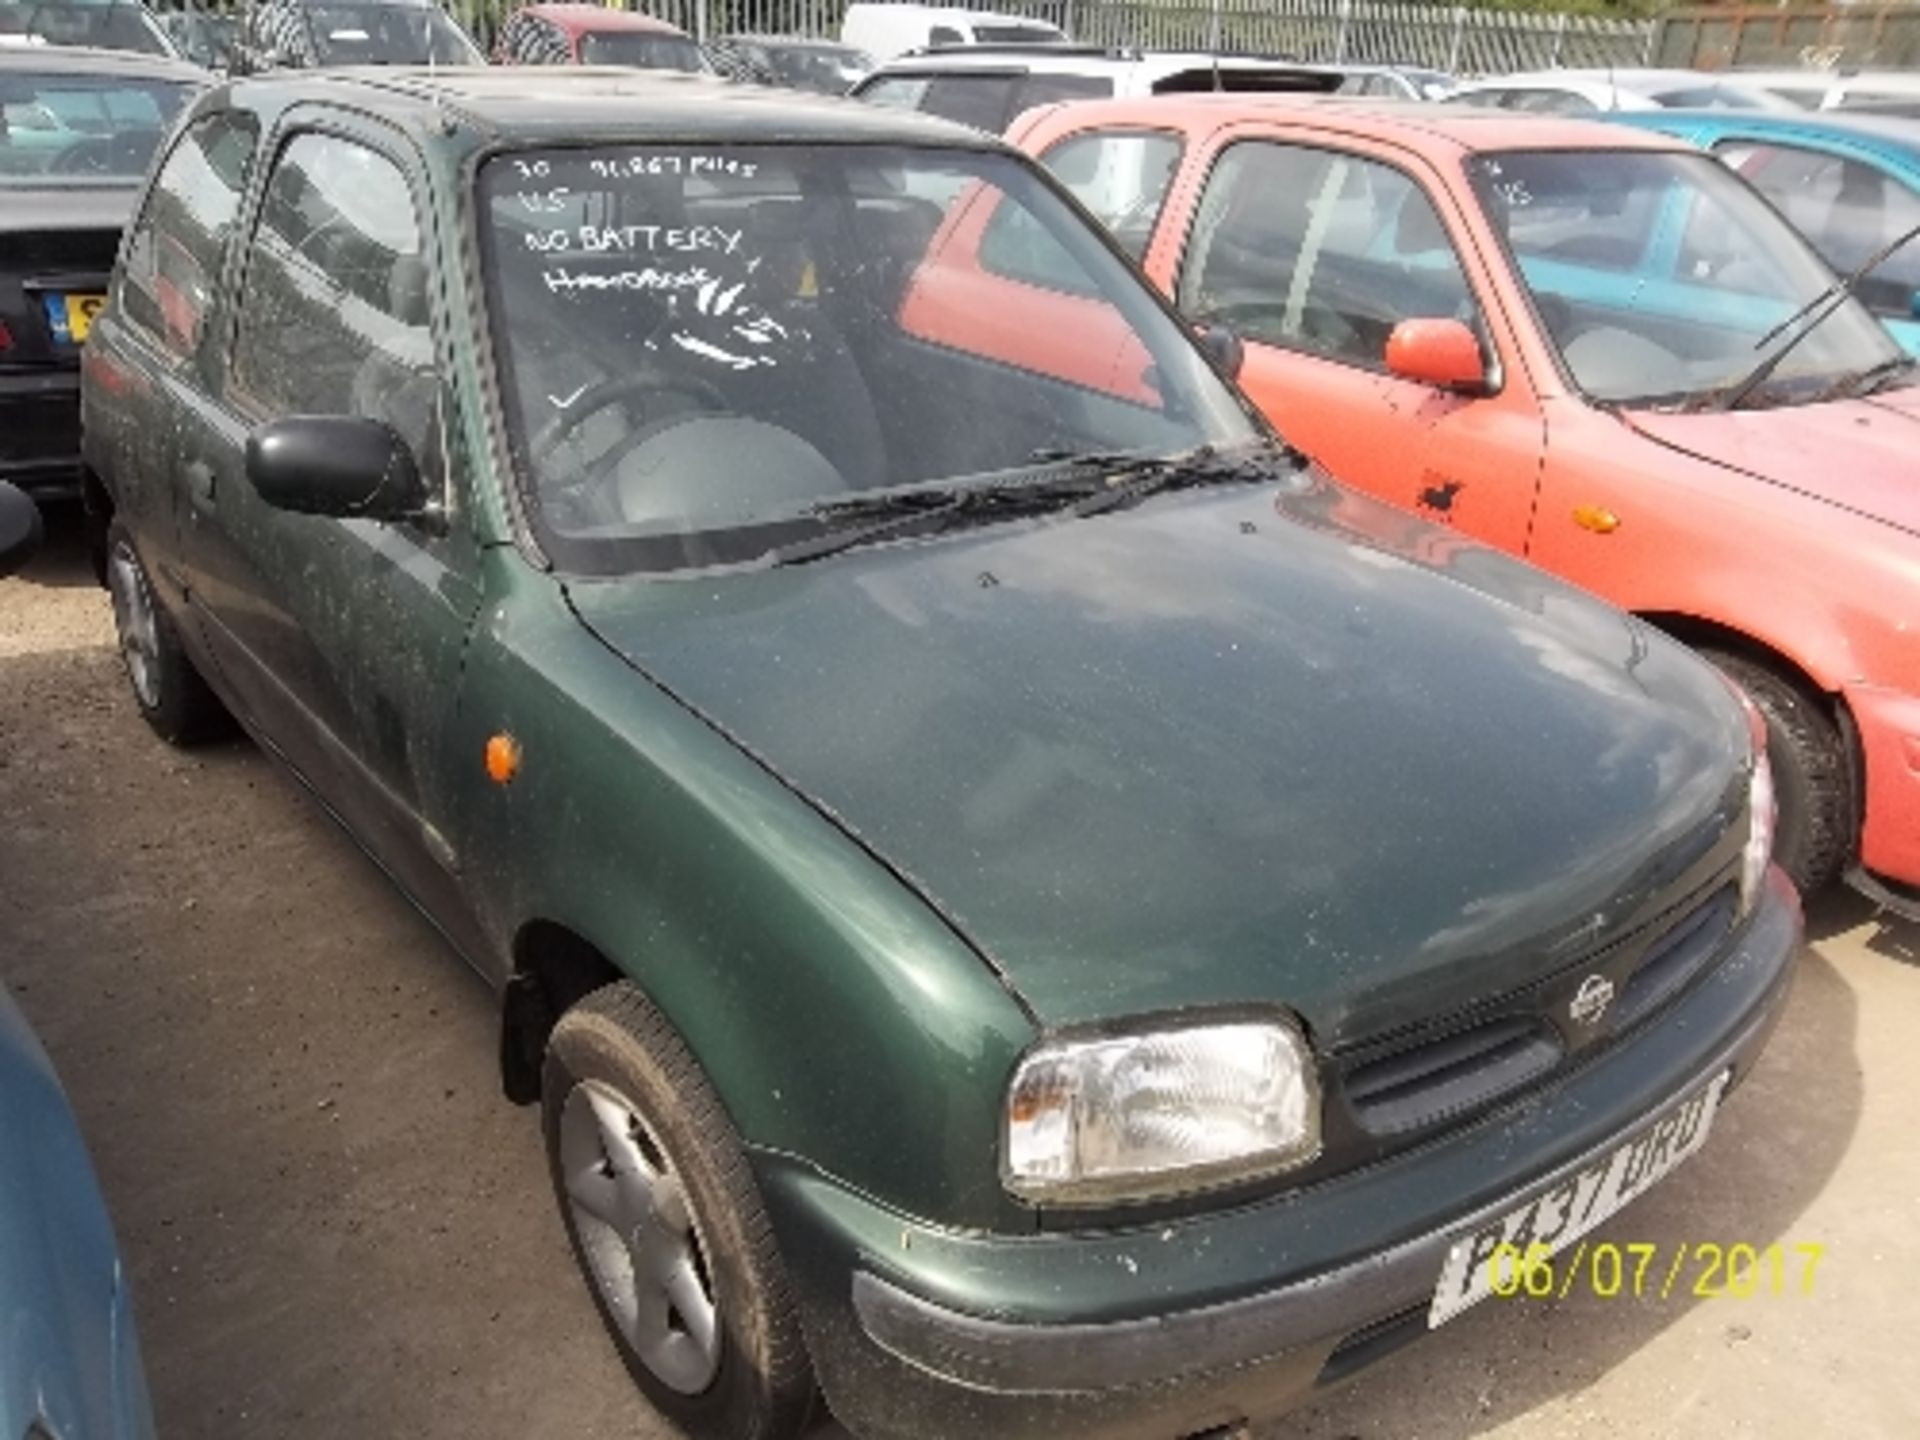 Nissan Micra GX - P437 DRD Date of registration: 17.03.1997 998cc, petrol, variable speed auto, - Image 2 of 4